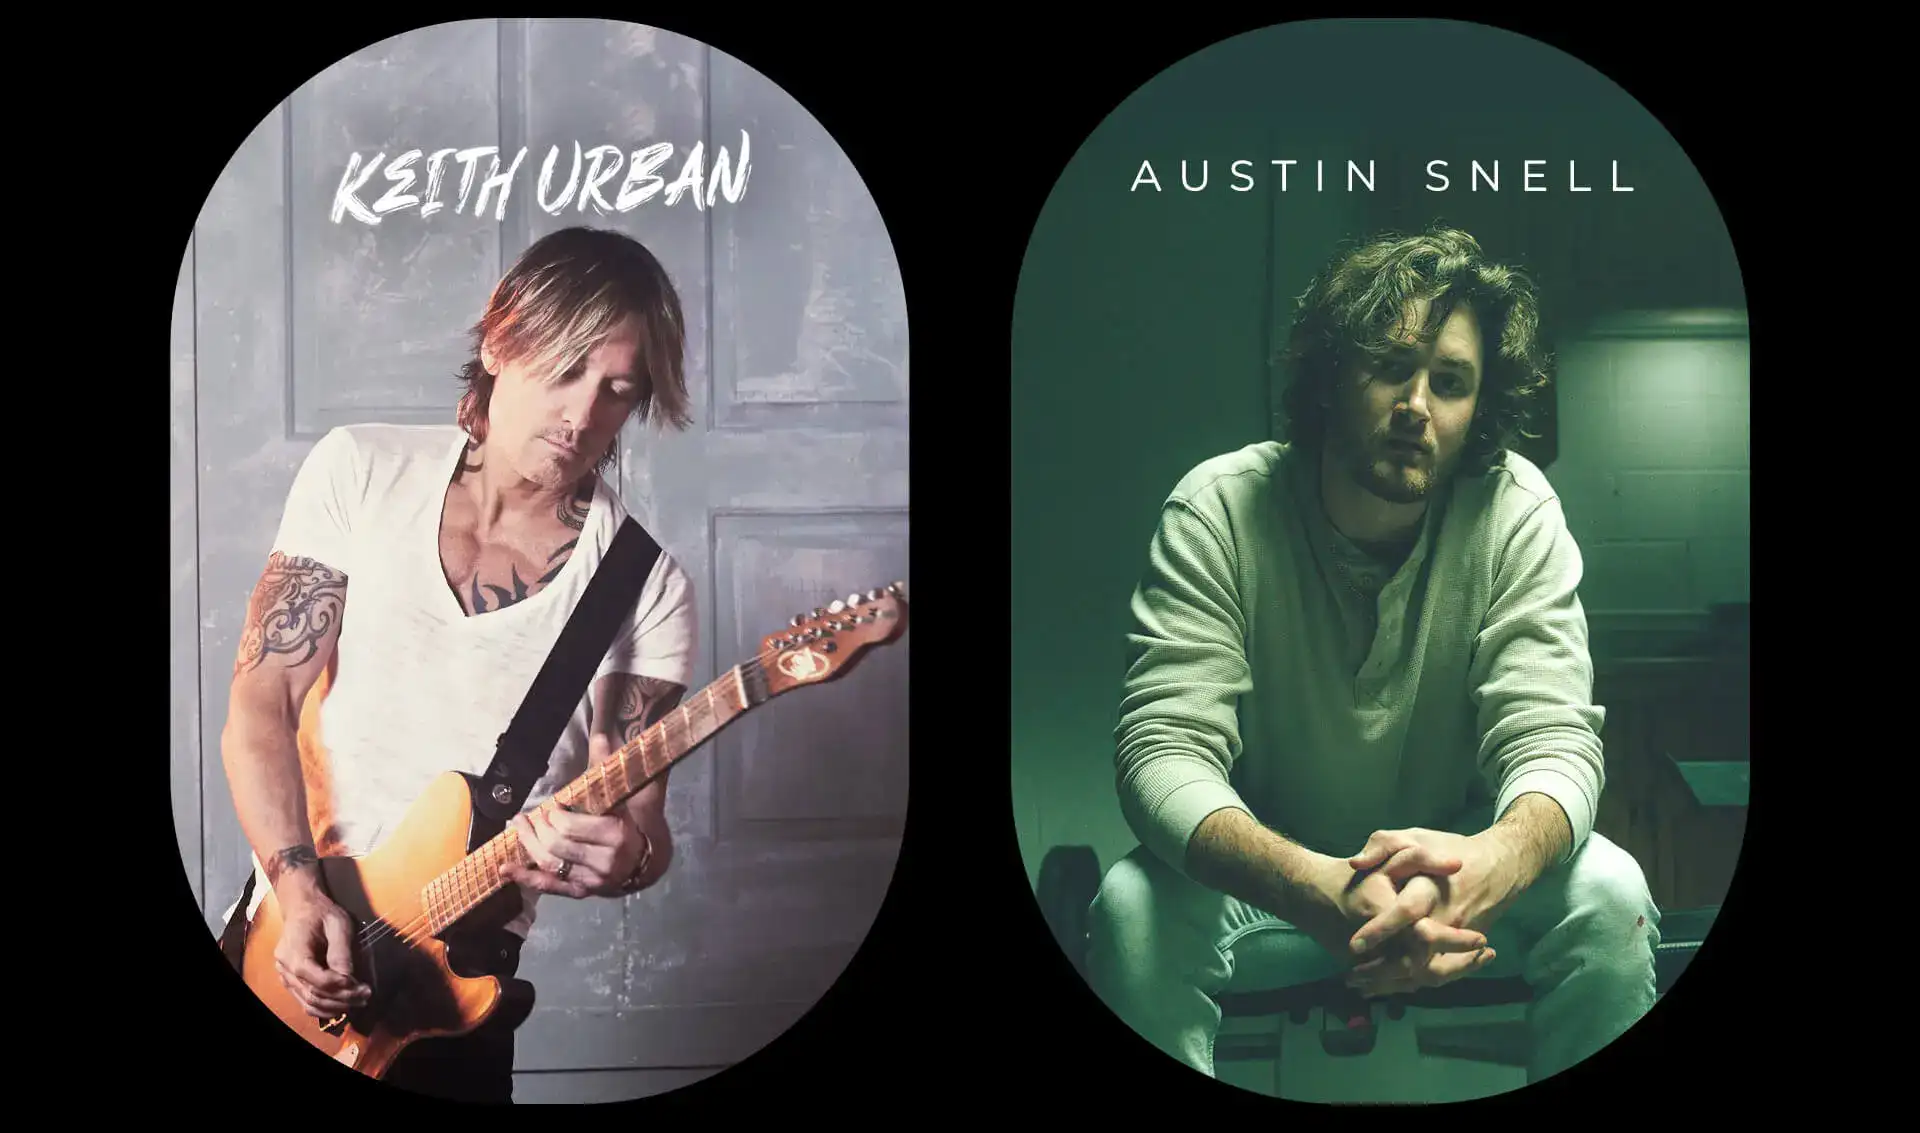 Keith Urban and Austin Snell